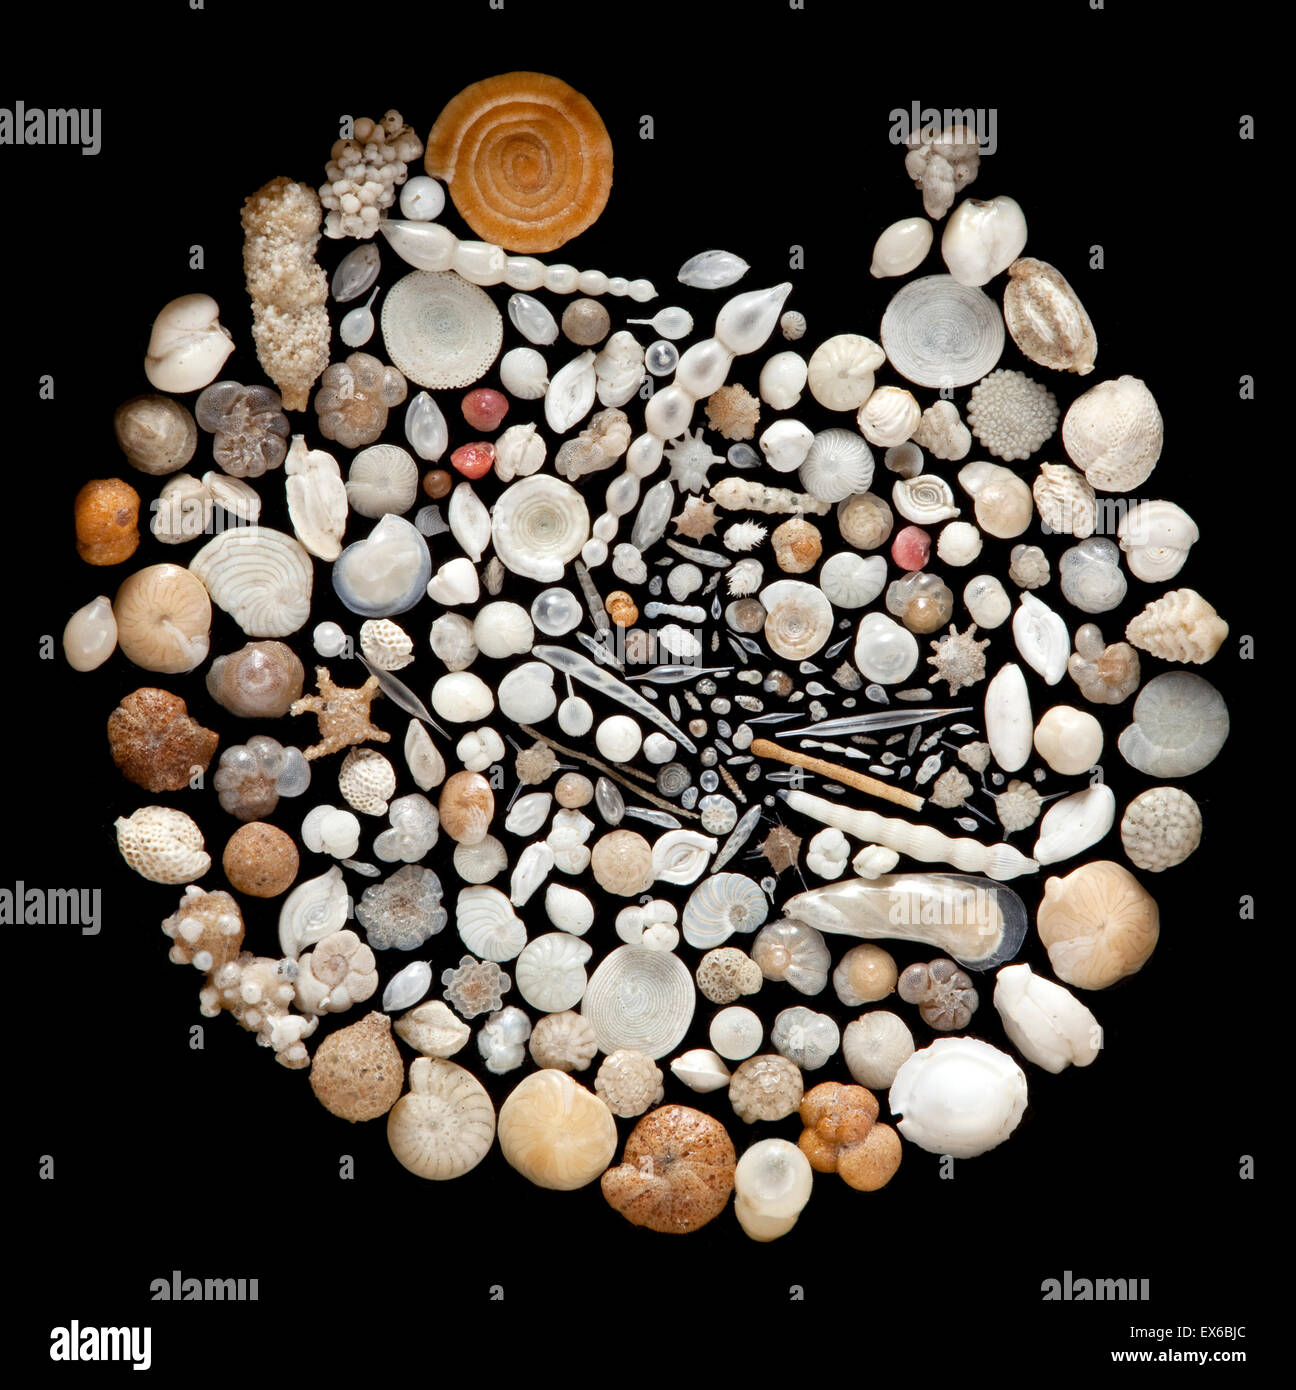 Foraminifera photography and images - Alamy